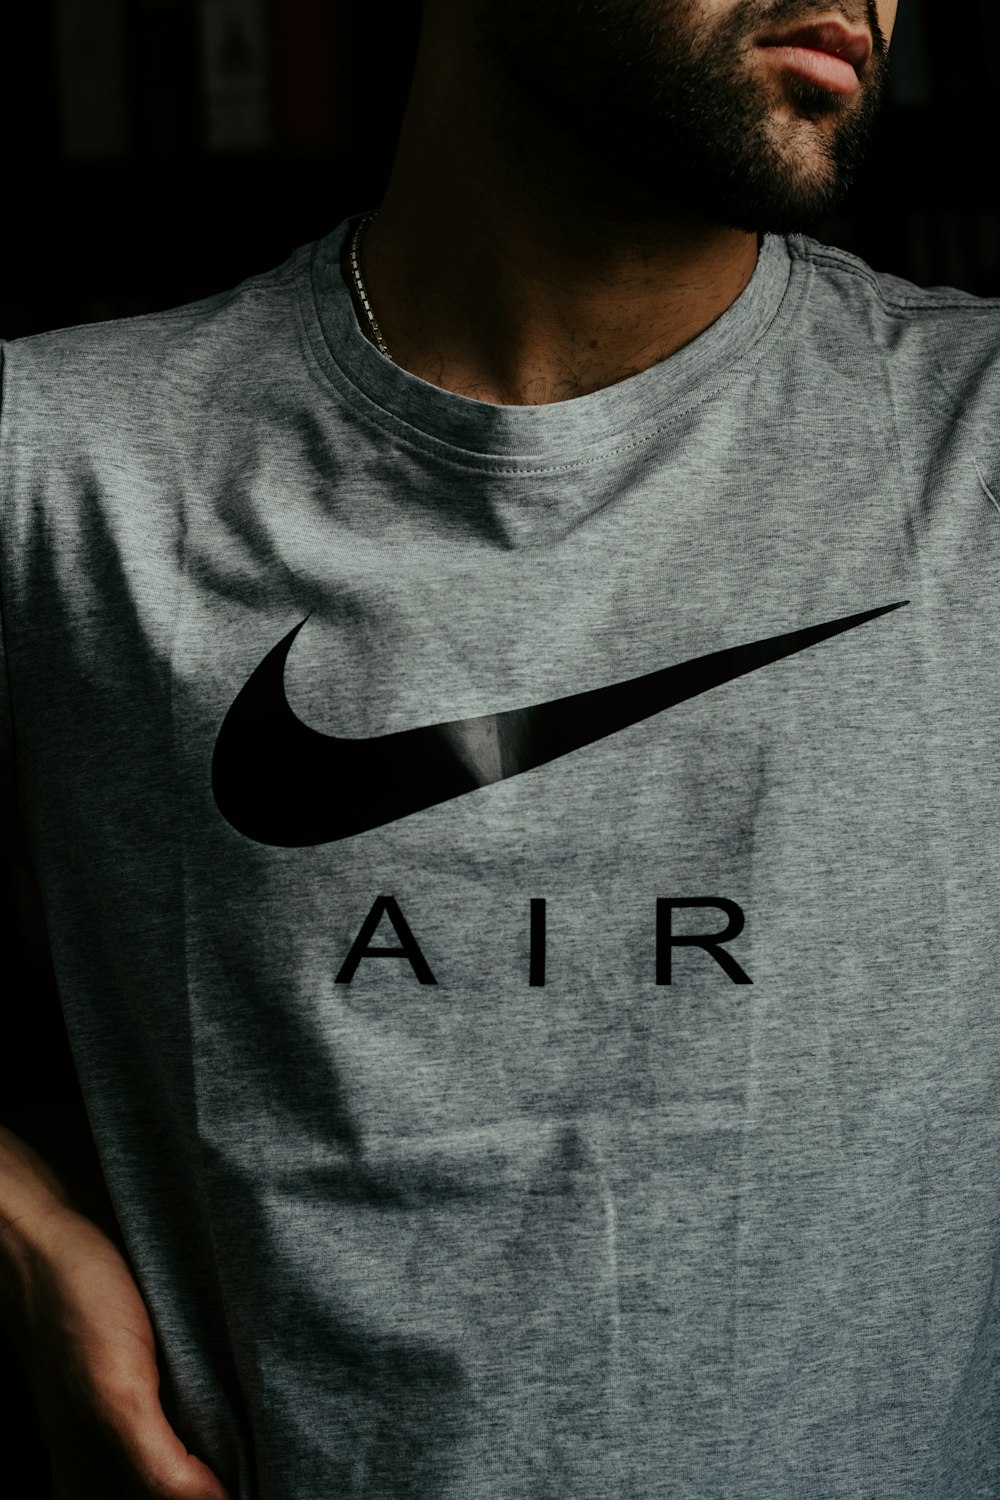 man in gray and black nike crew neck t-shirt